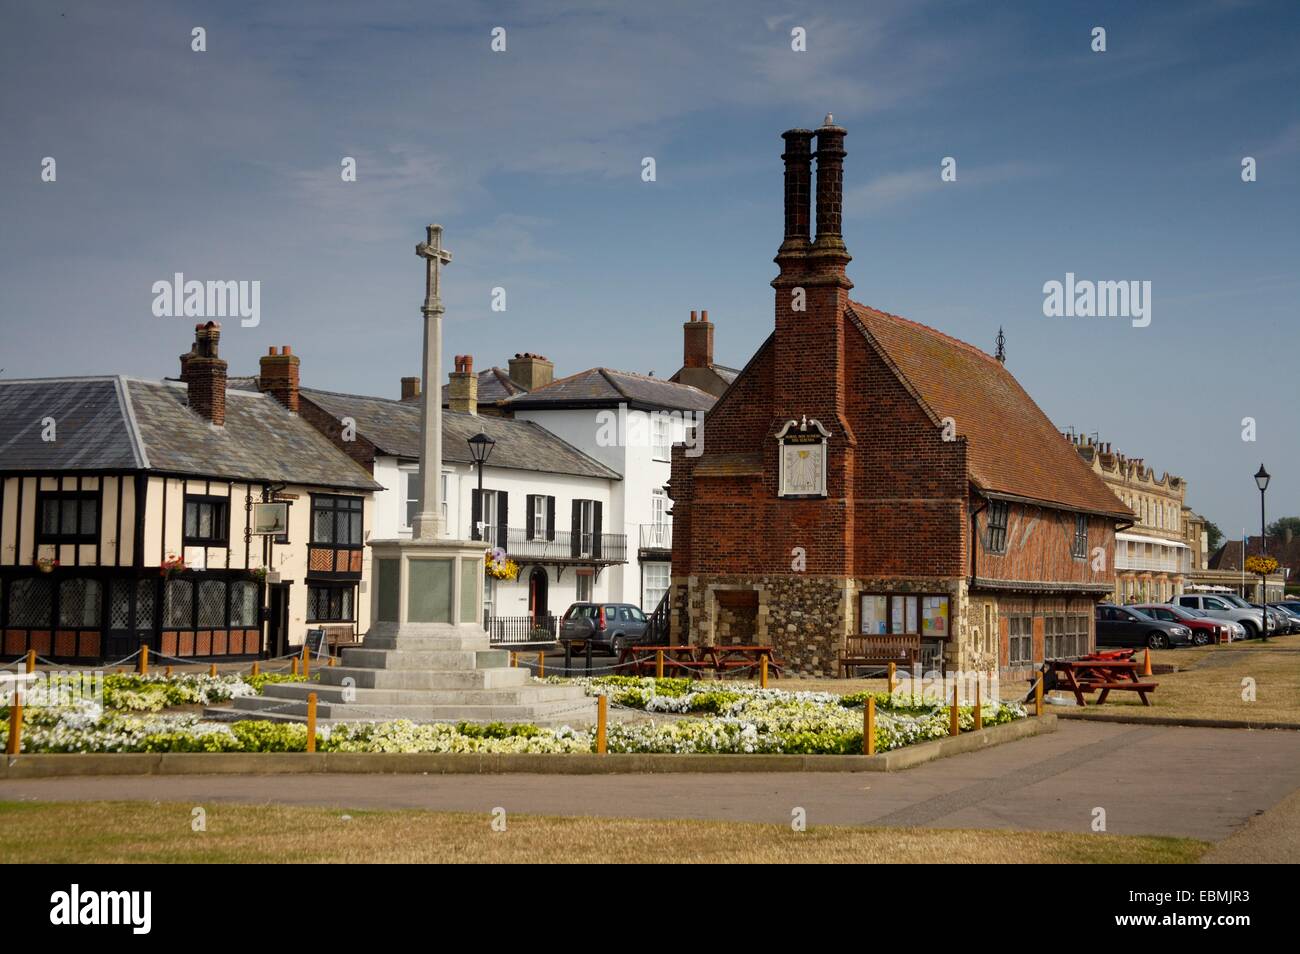 Moot Hall and Market Cross, Aldeburgh, Suffolk, UK Stock Photo